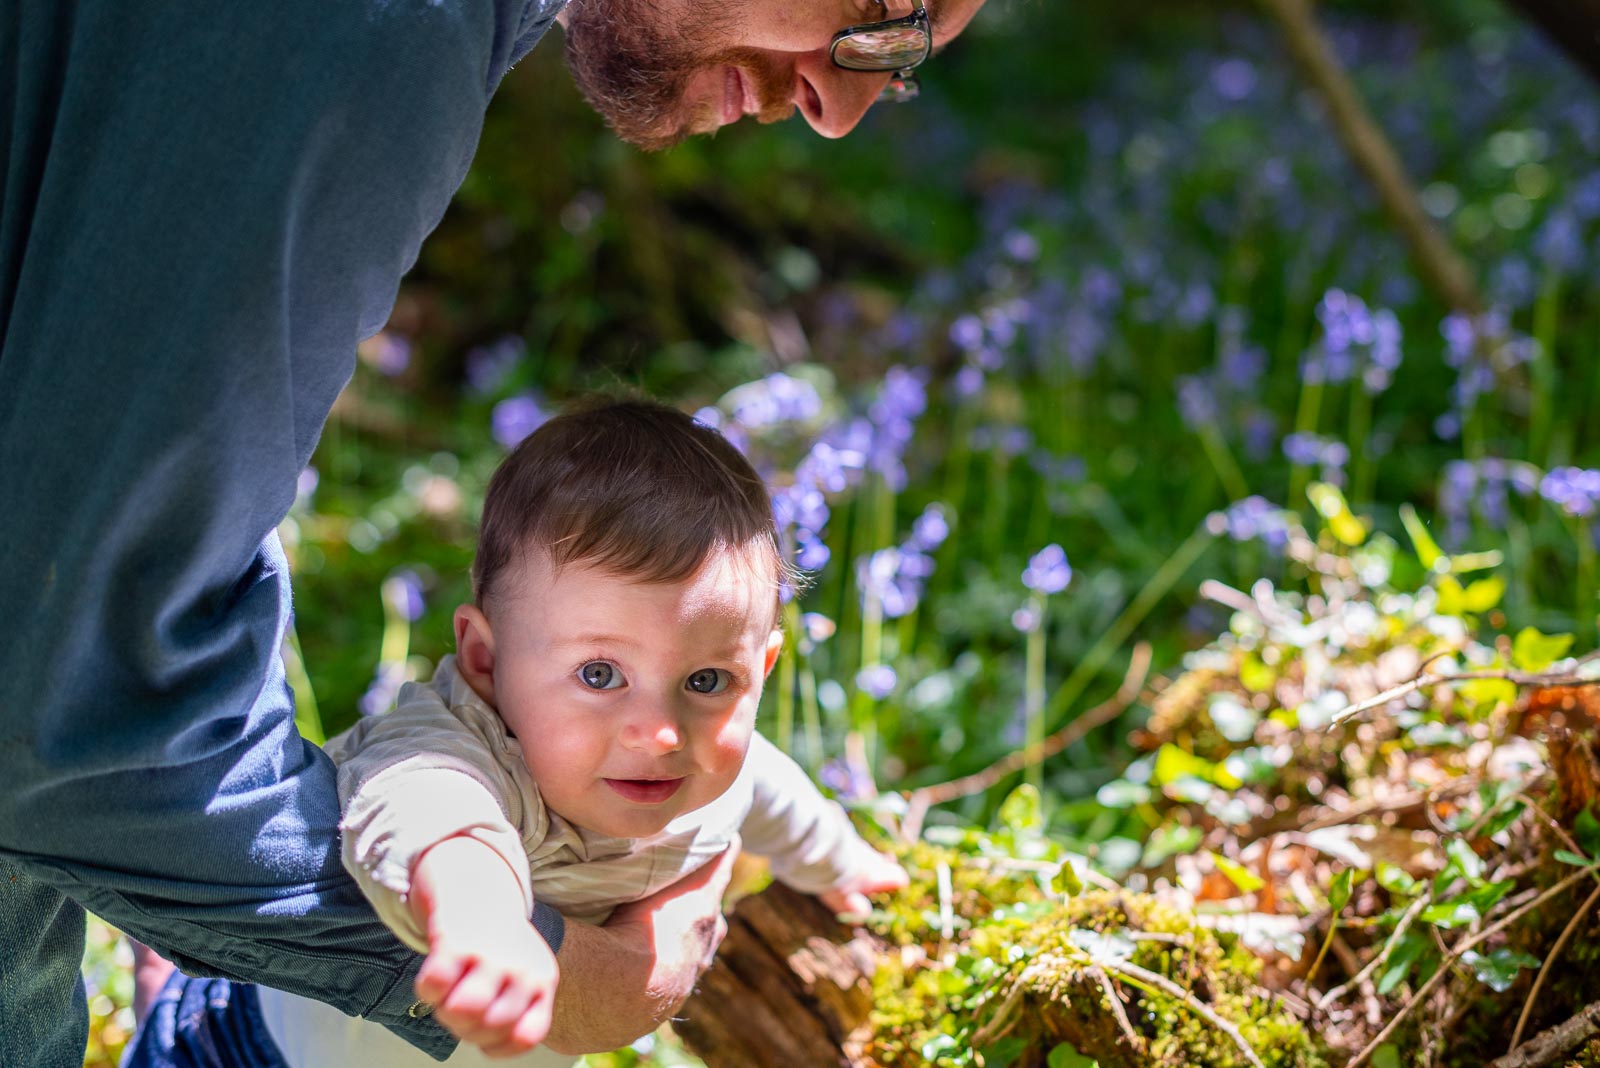 Neill holds his eight month old baby Alasdair among the bluebells at Battle Great Woods.